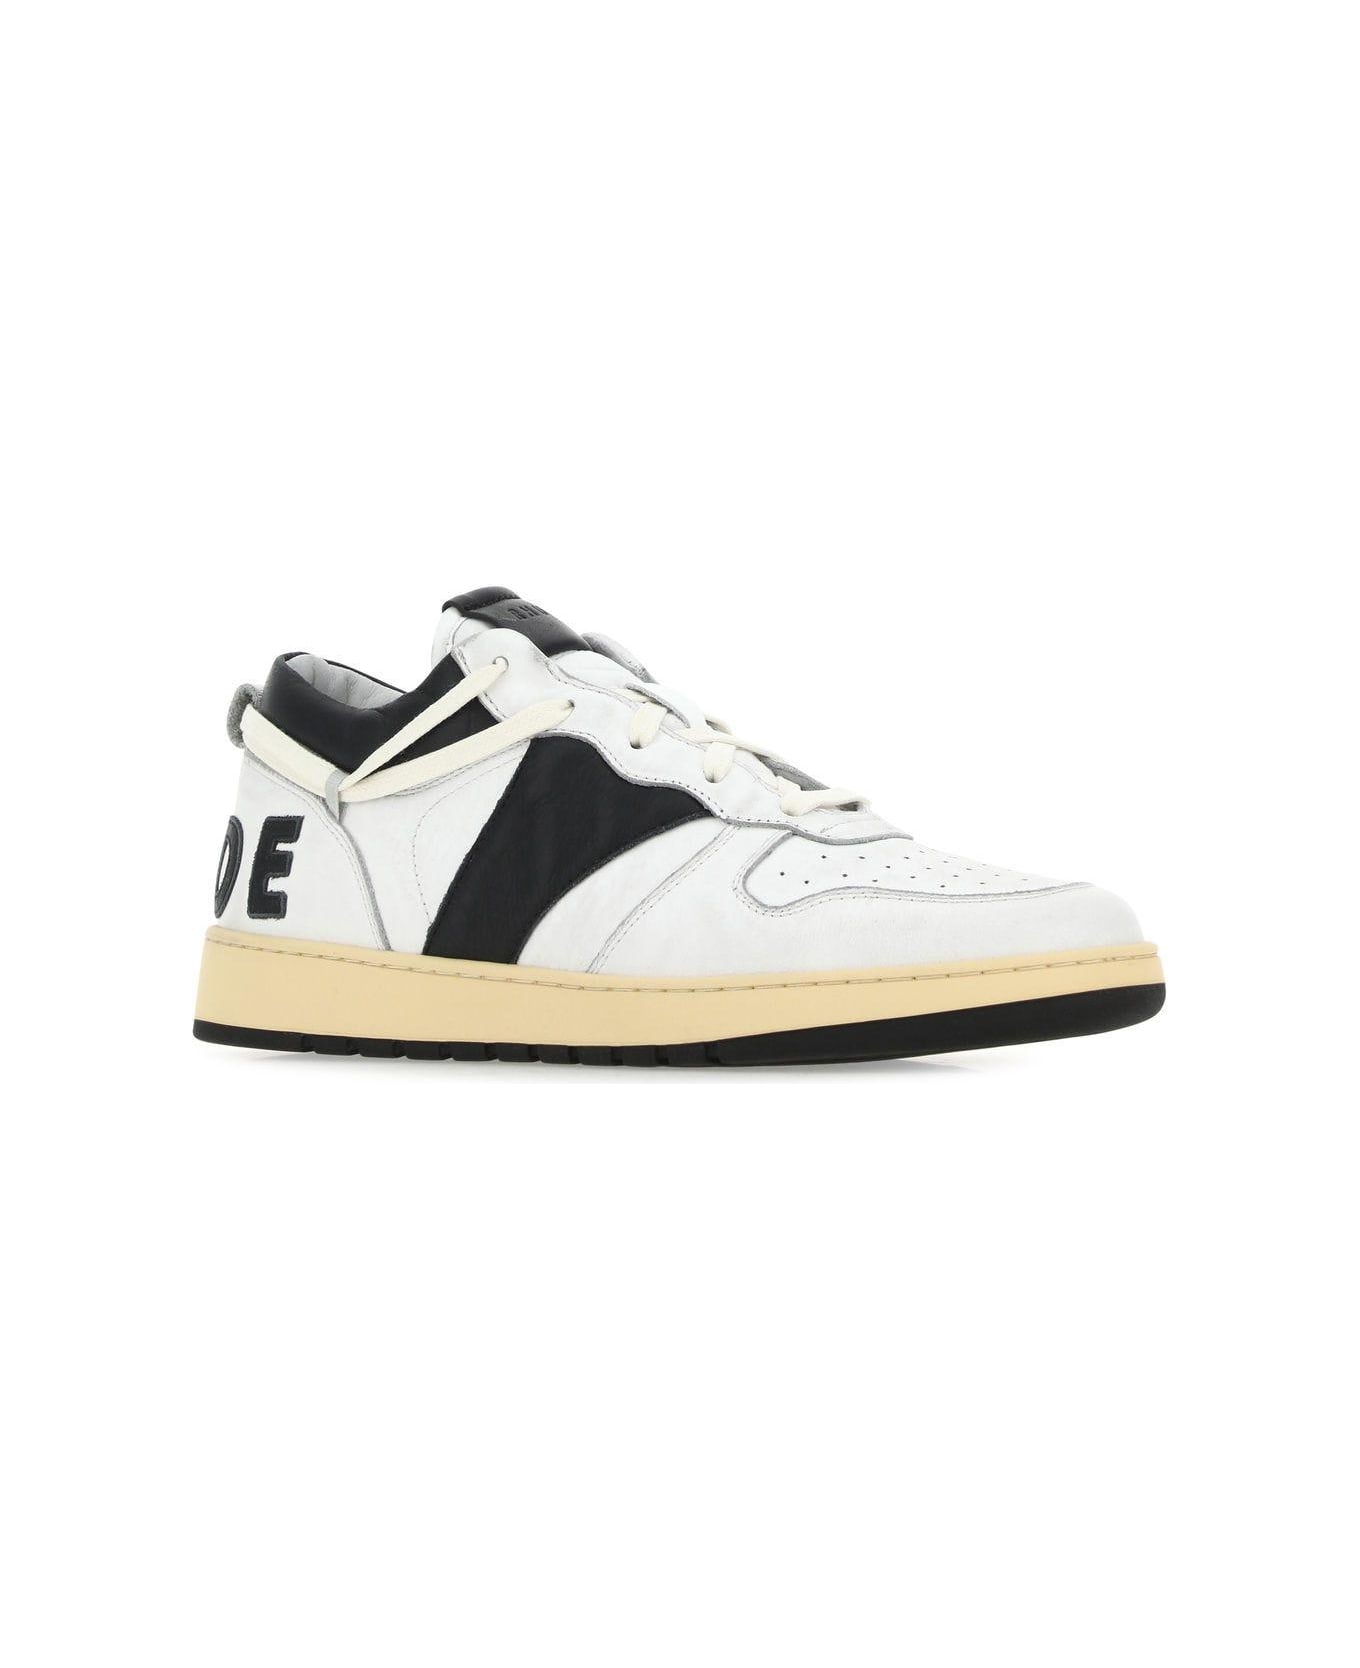 Rhude Two-tone Leather Rhecess Sneakers - WHITE/BLACK